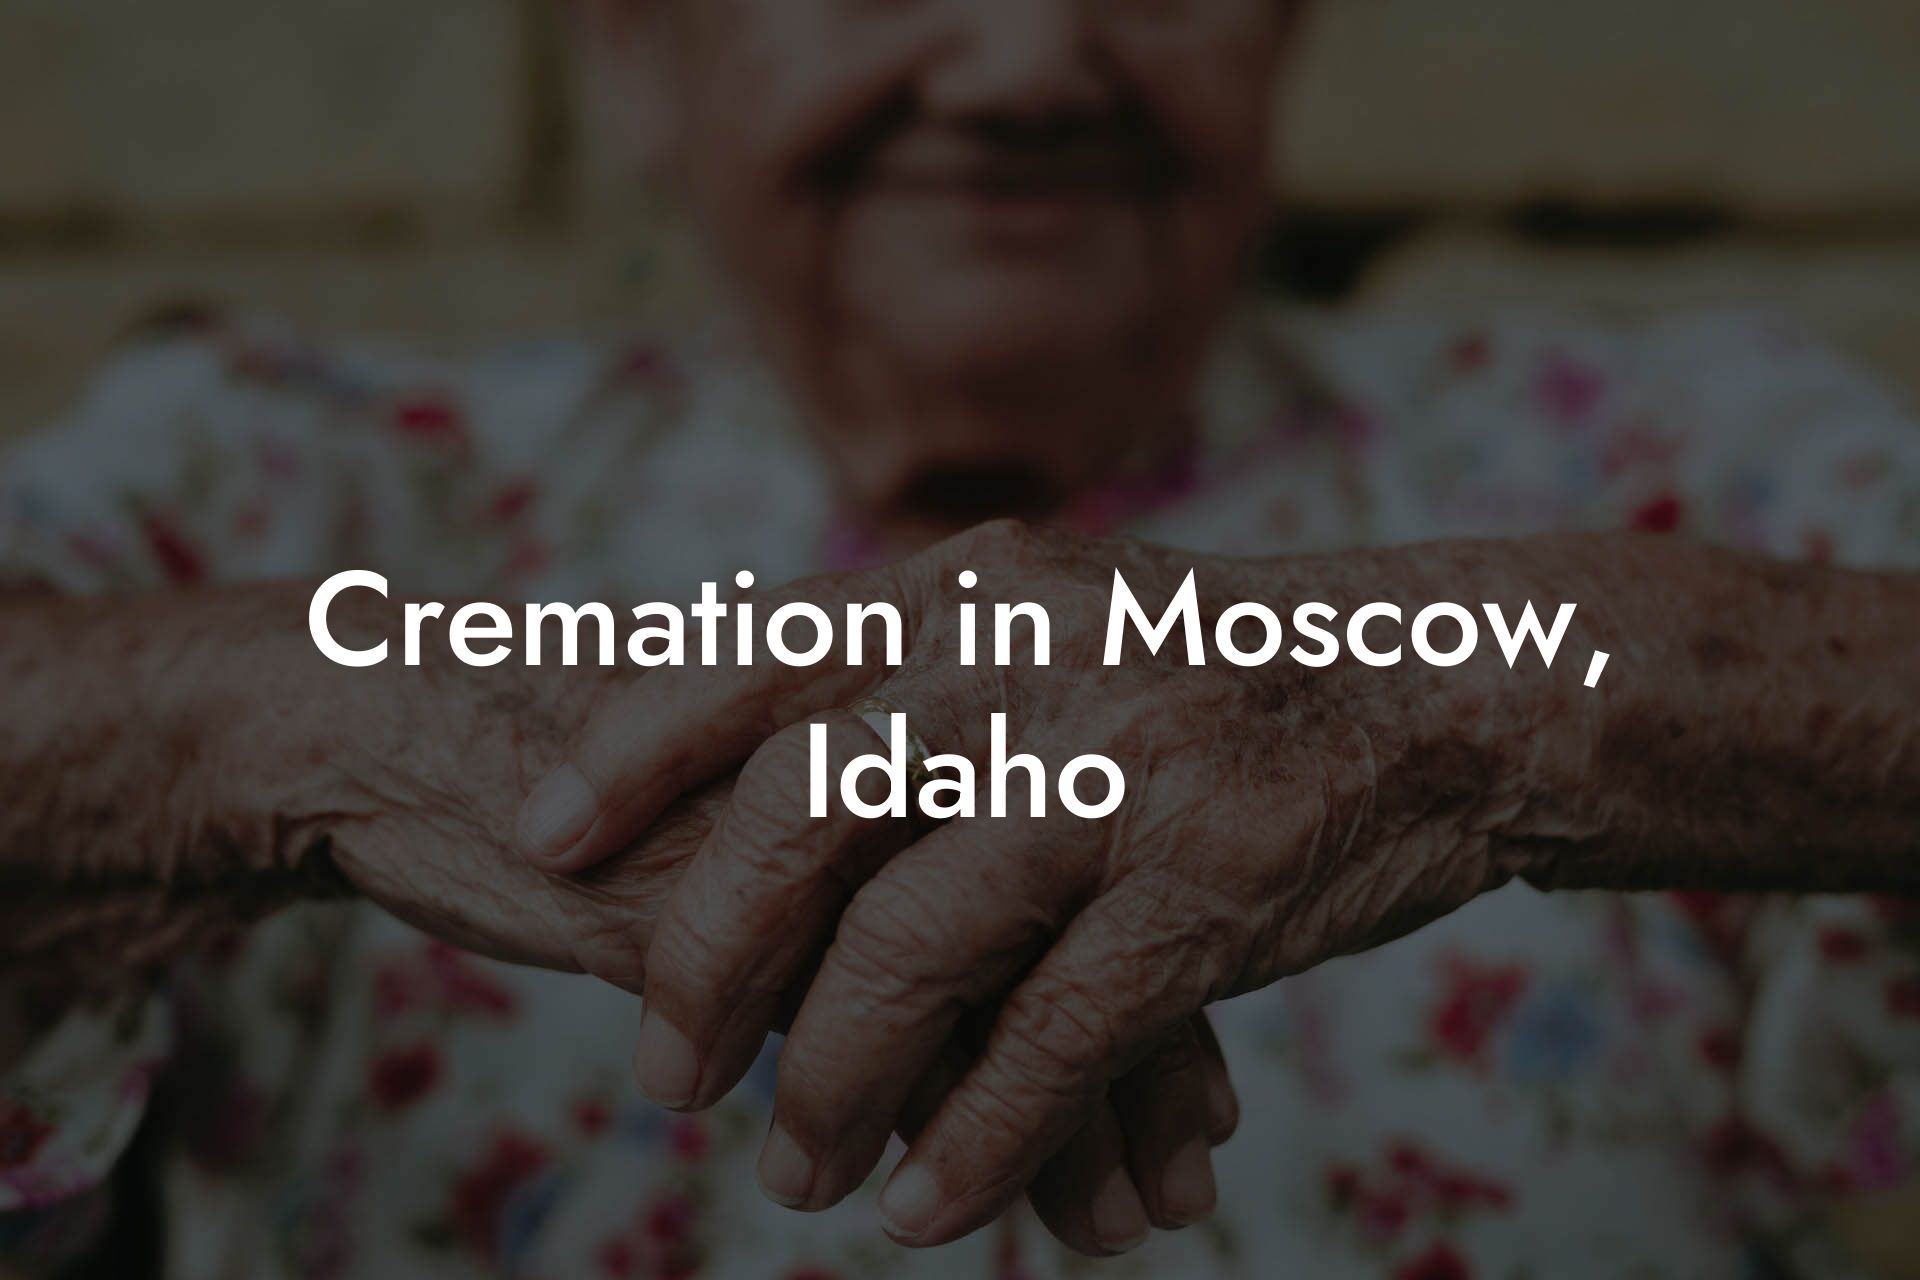 Cremation in Moscow, Idaho